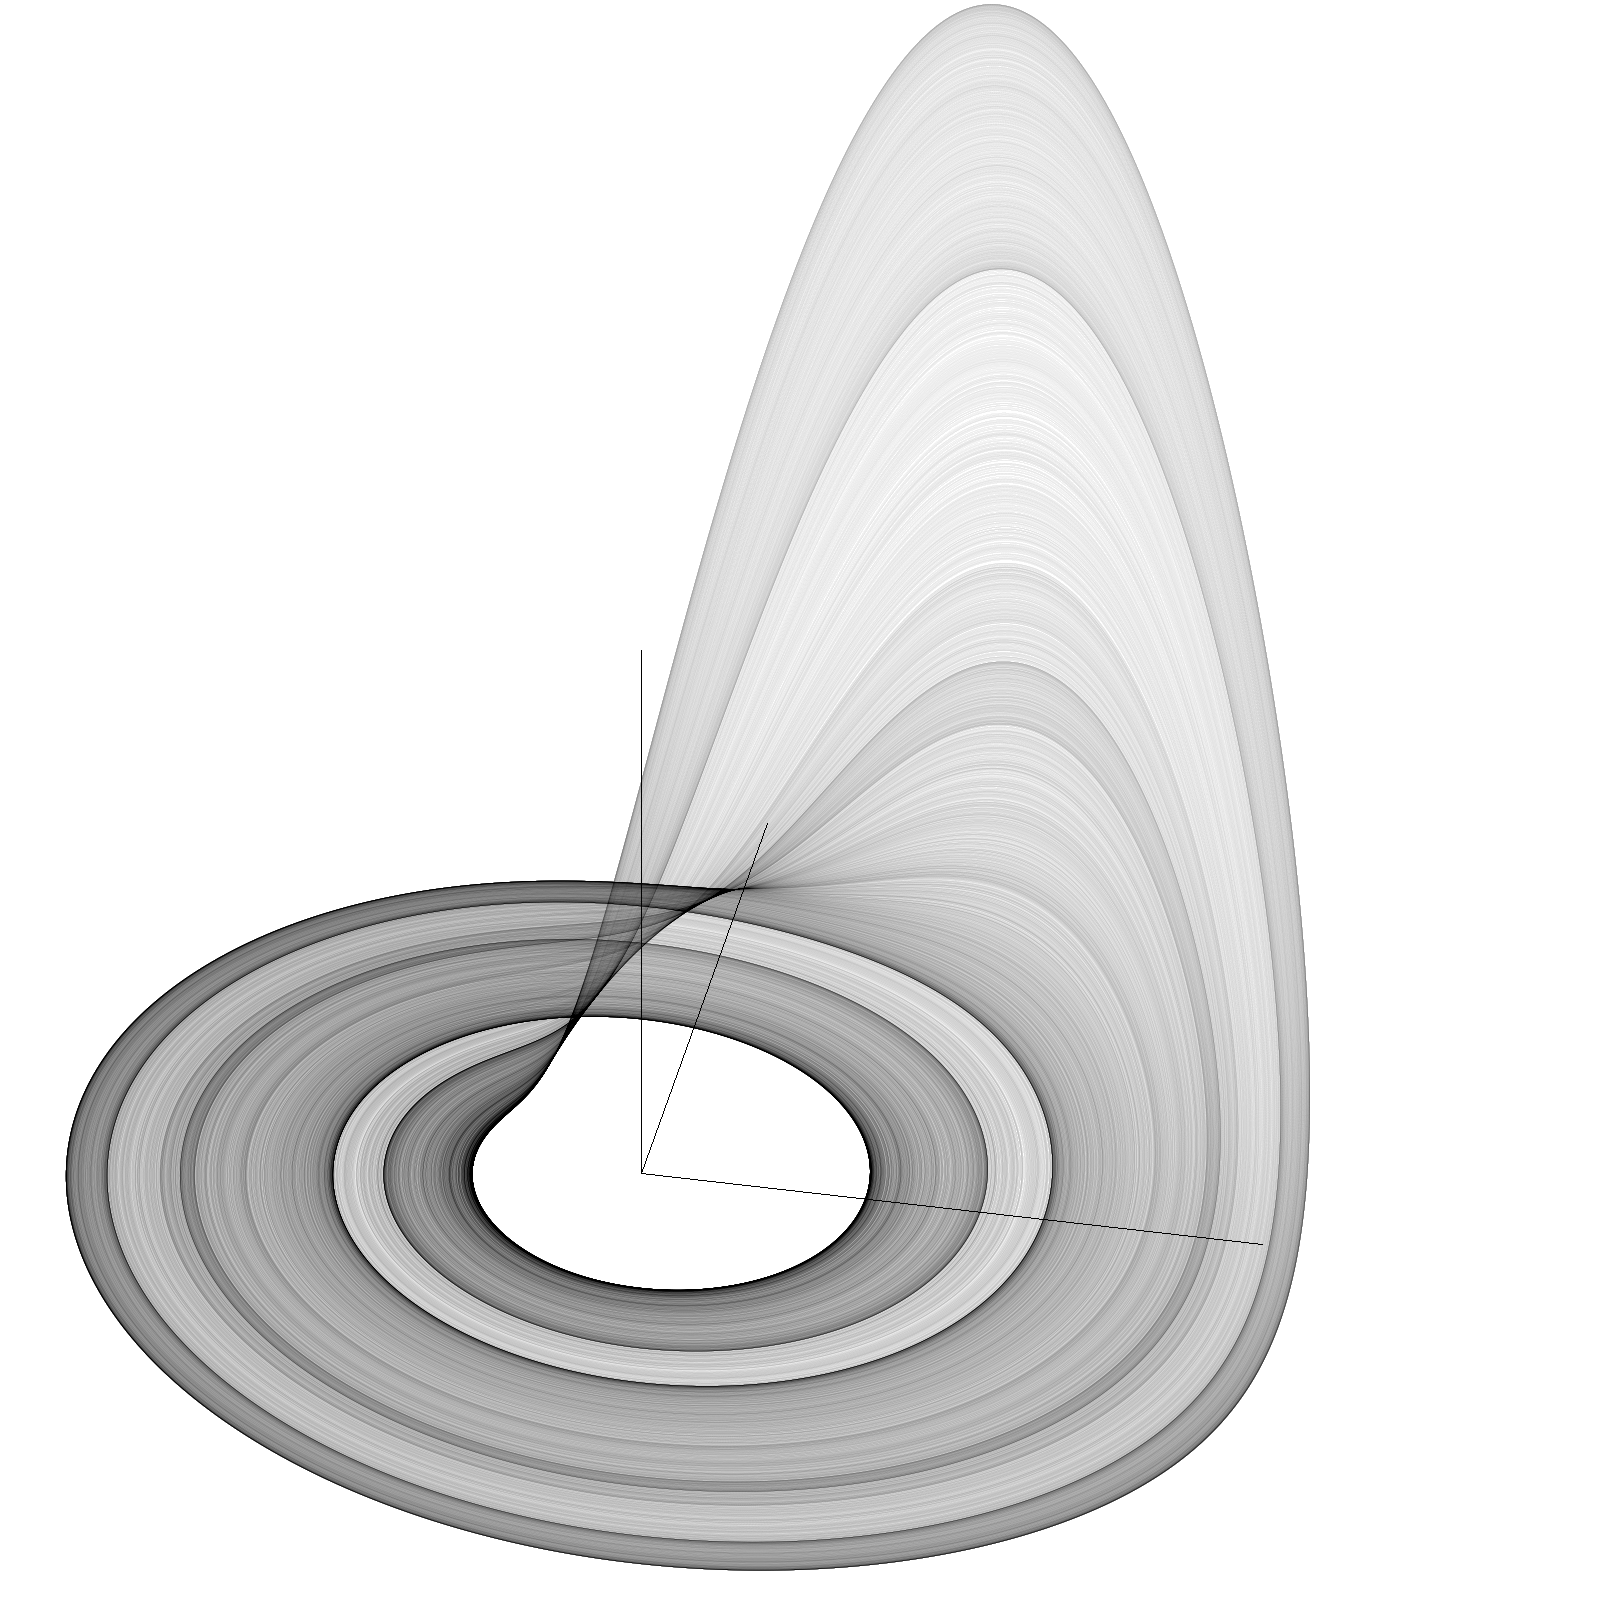 http://upload.wikimedia.org/wikipedia/commons/7/75/Roessler_attractor.png